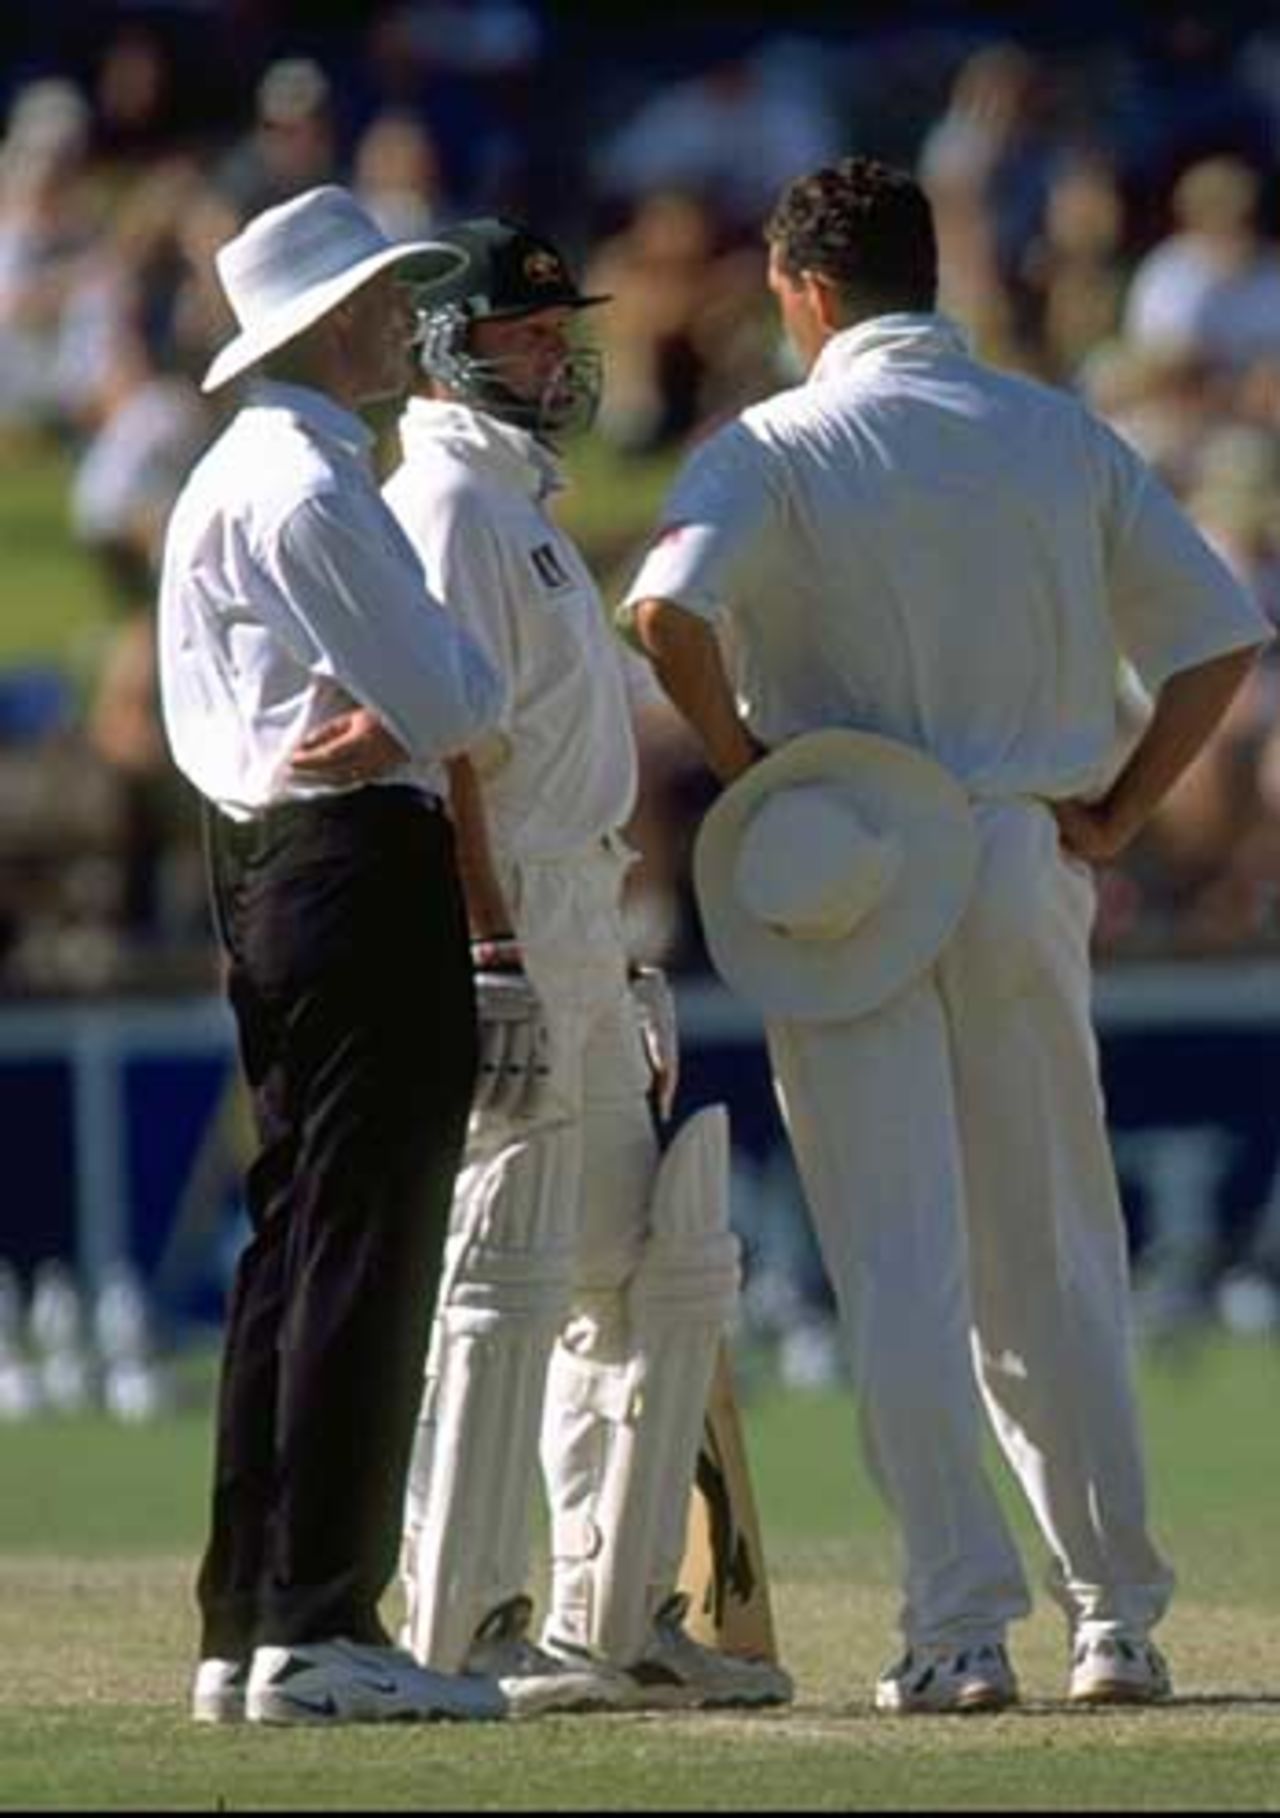 A bouncer from Shaun Pollock caused Mark Waugh to clip the stumps, dislodging the bails, but was given not-out. Hansie Cronje discusses the incident with Waugh and the umpire, Australia v South Africa, 3rd Test, Adelaide, Jan 30 - Feb 3, 1998